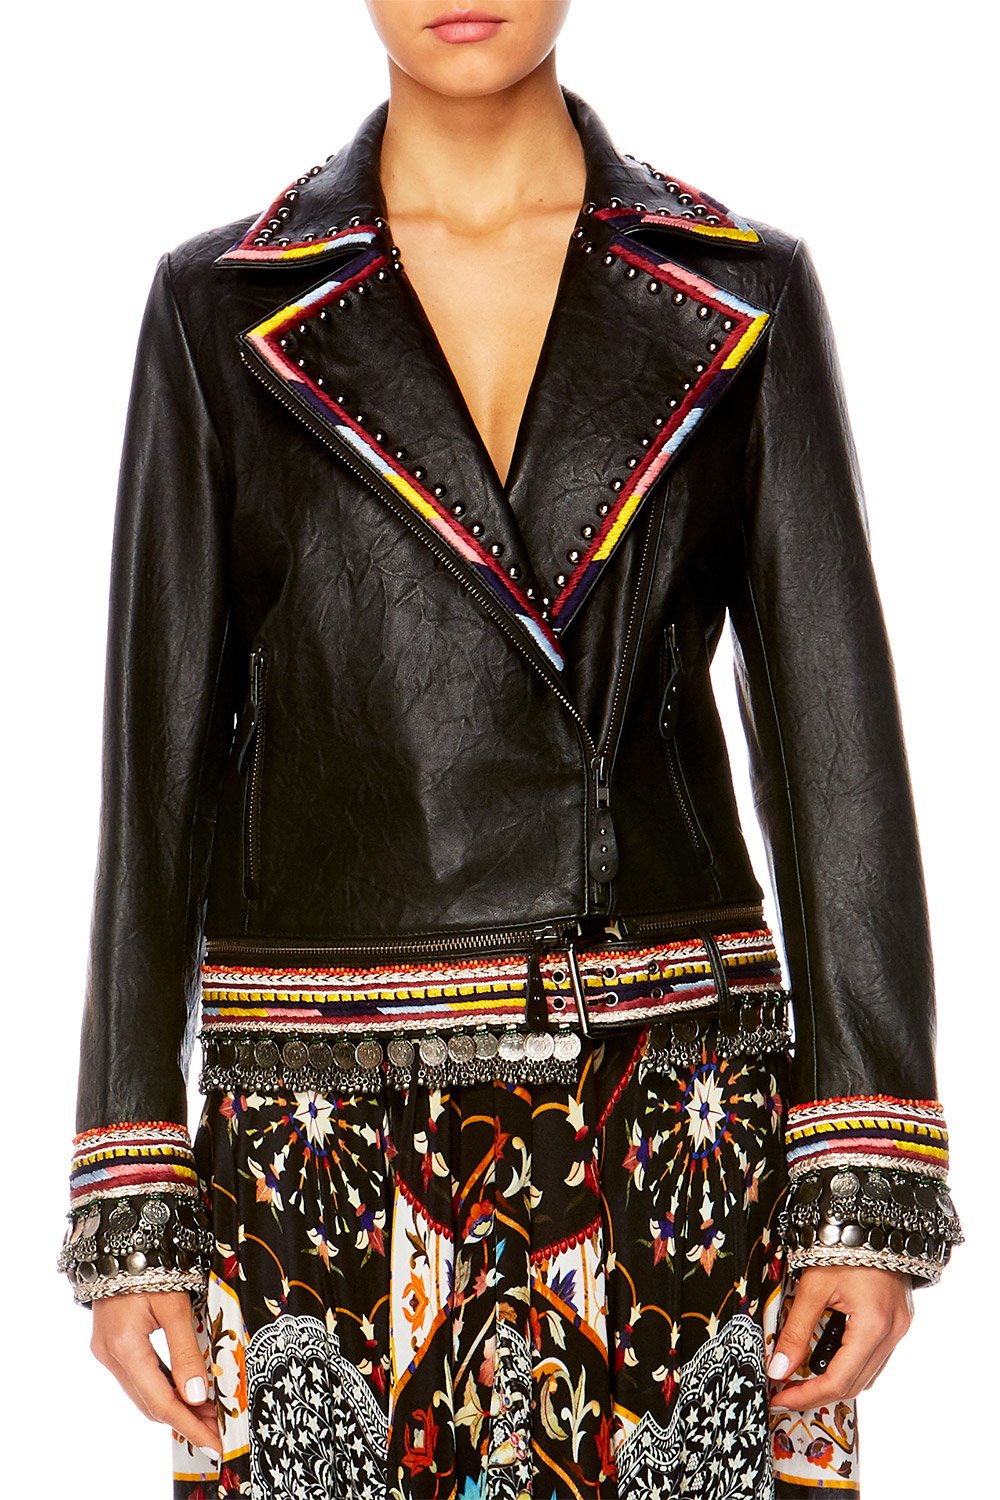 CHAMBER OF REFLECTIONS LEATHER JACKET